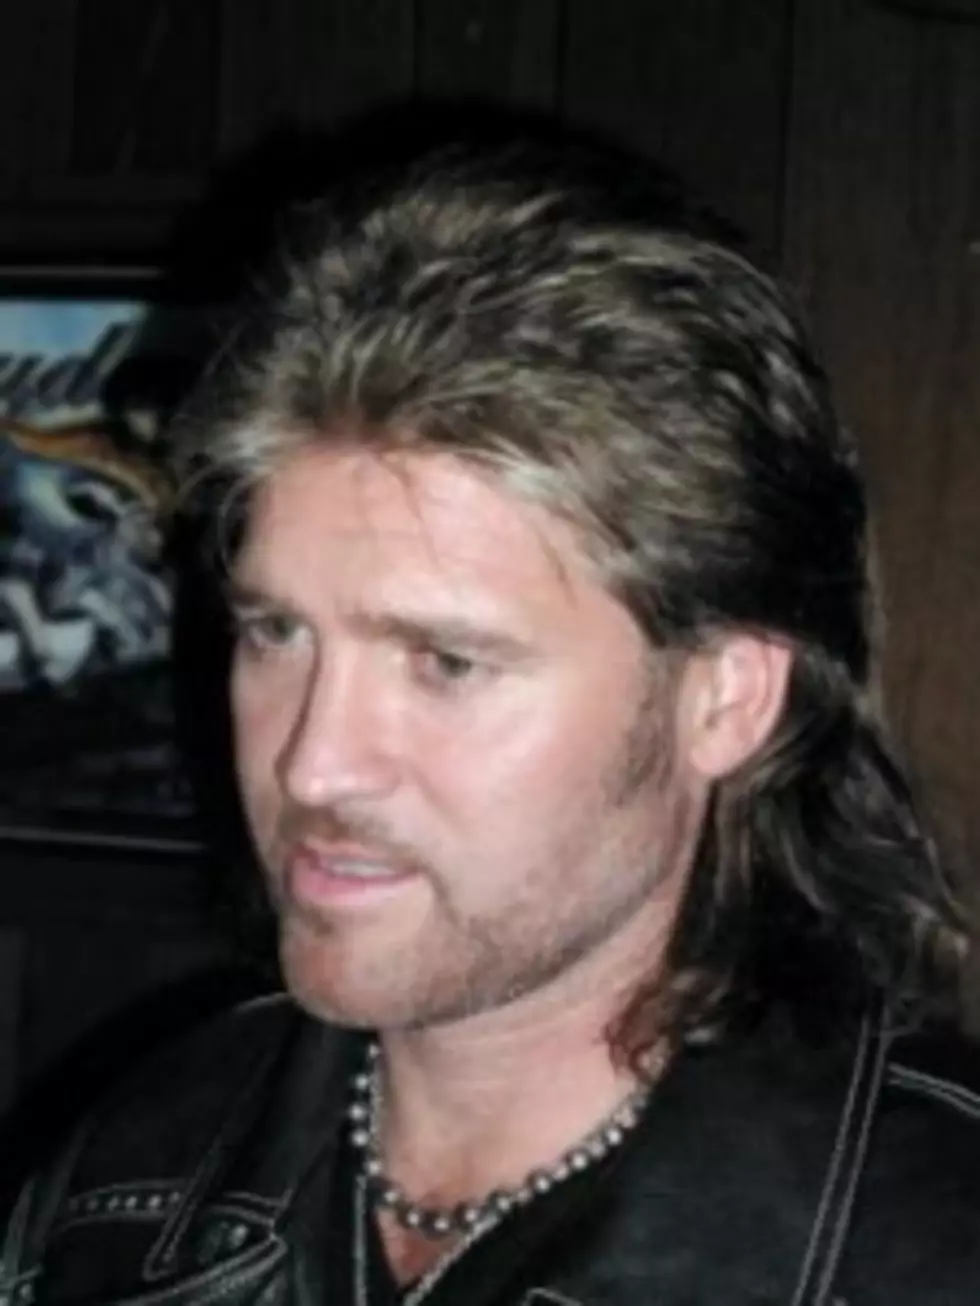 Mullet Fraud! Billy Ray's Mullet A Phony?